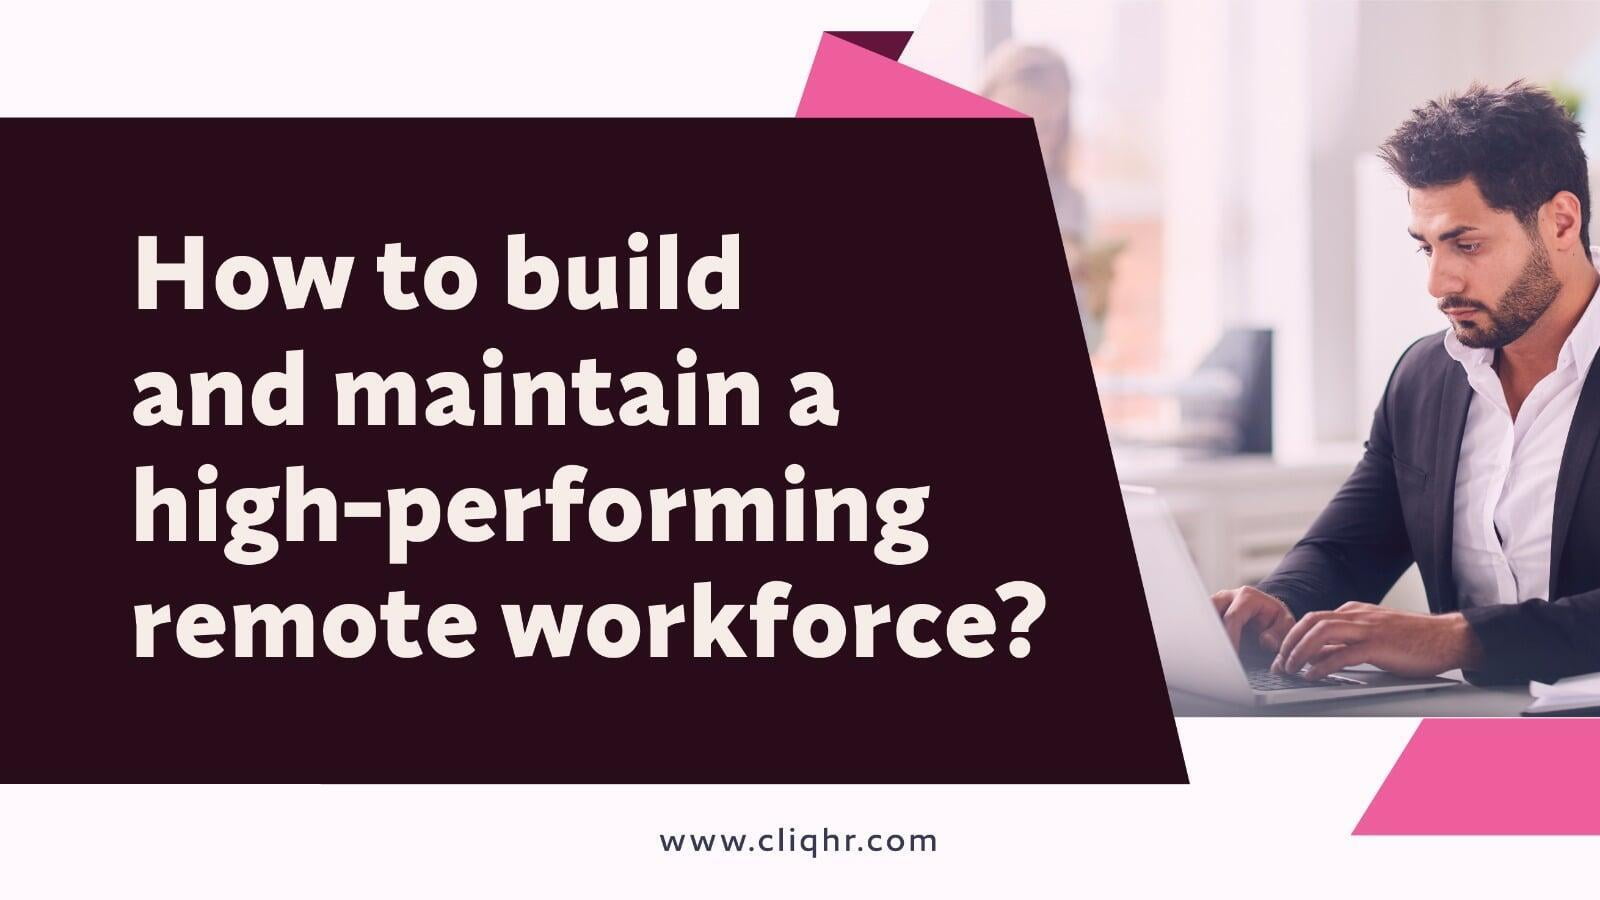 How to build and maintain a high-performing remote workforce?